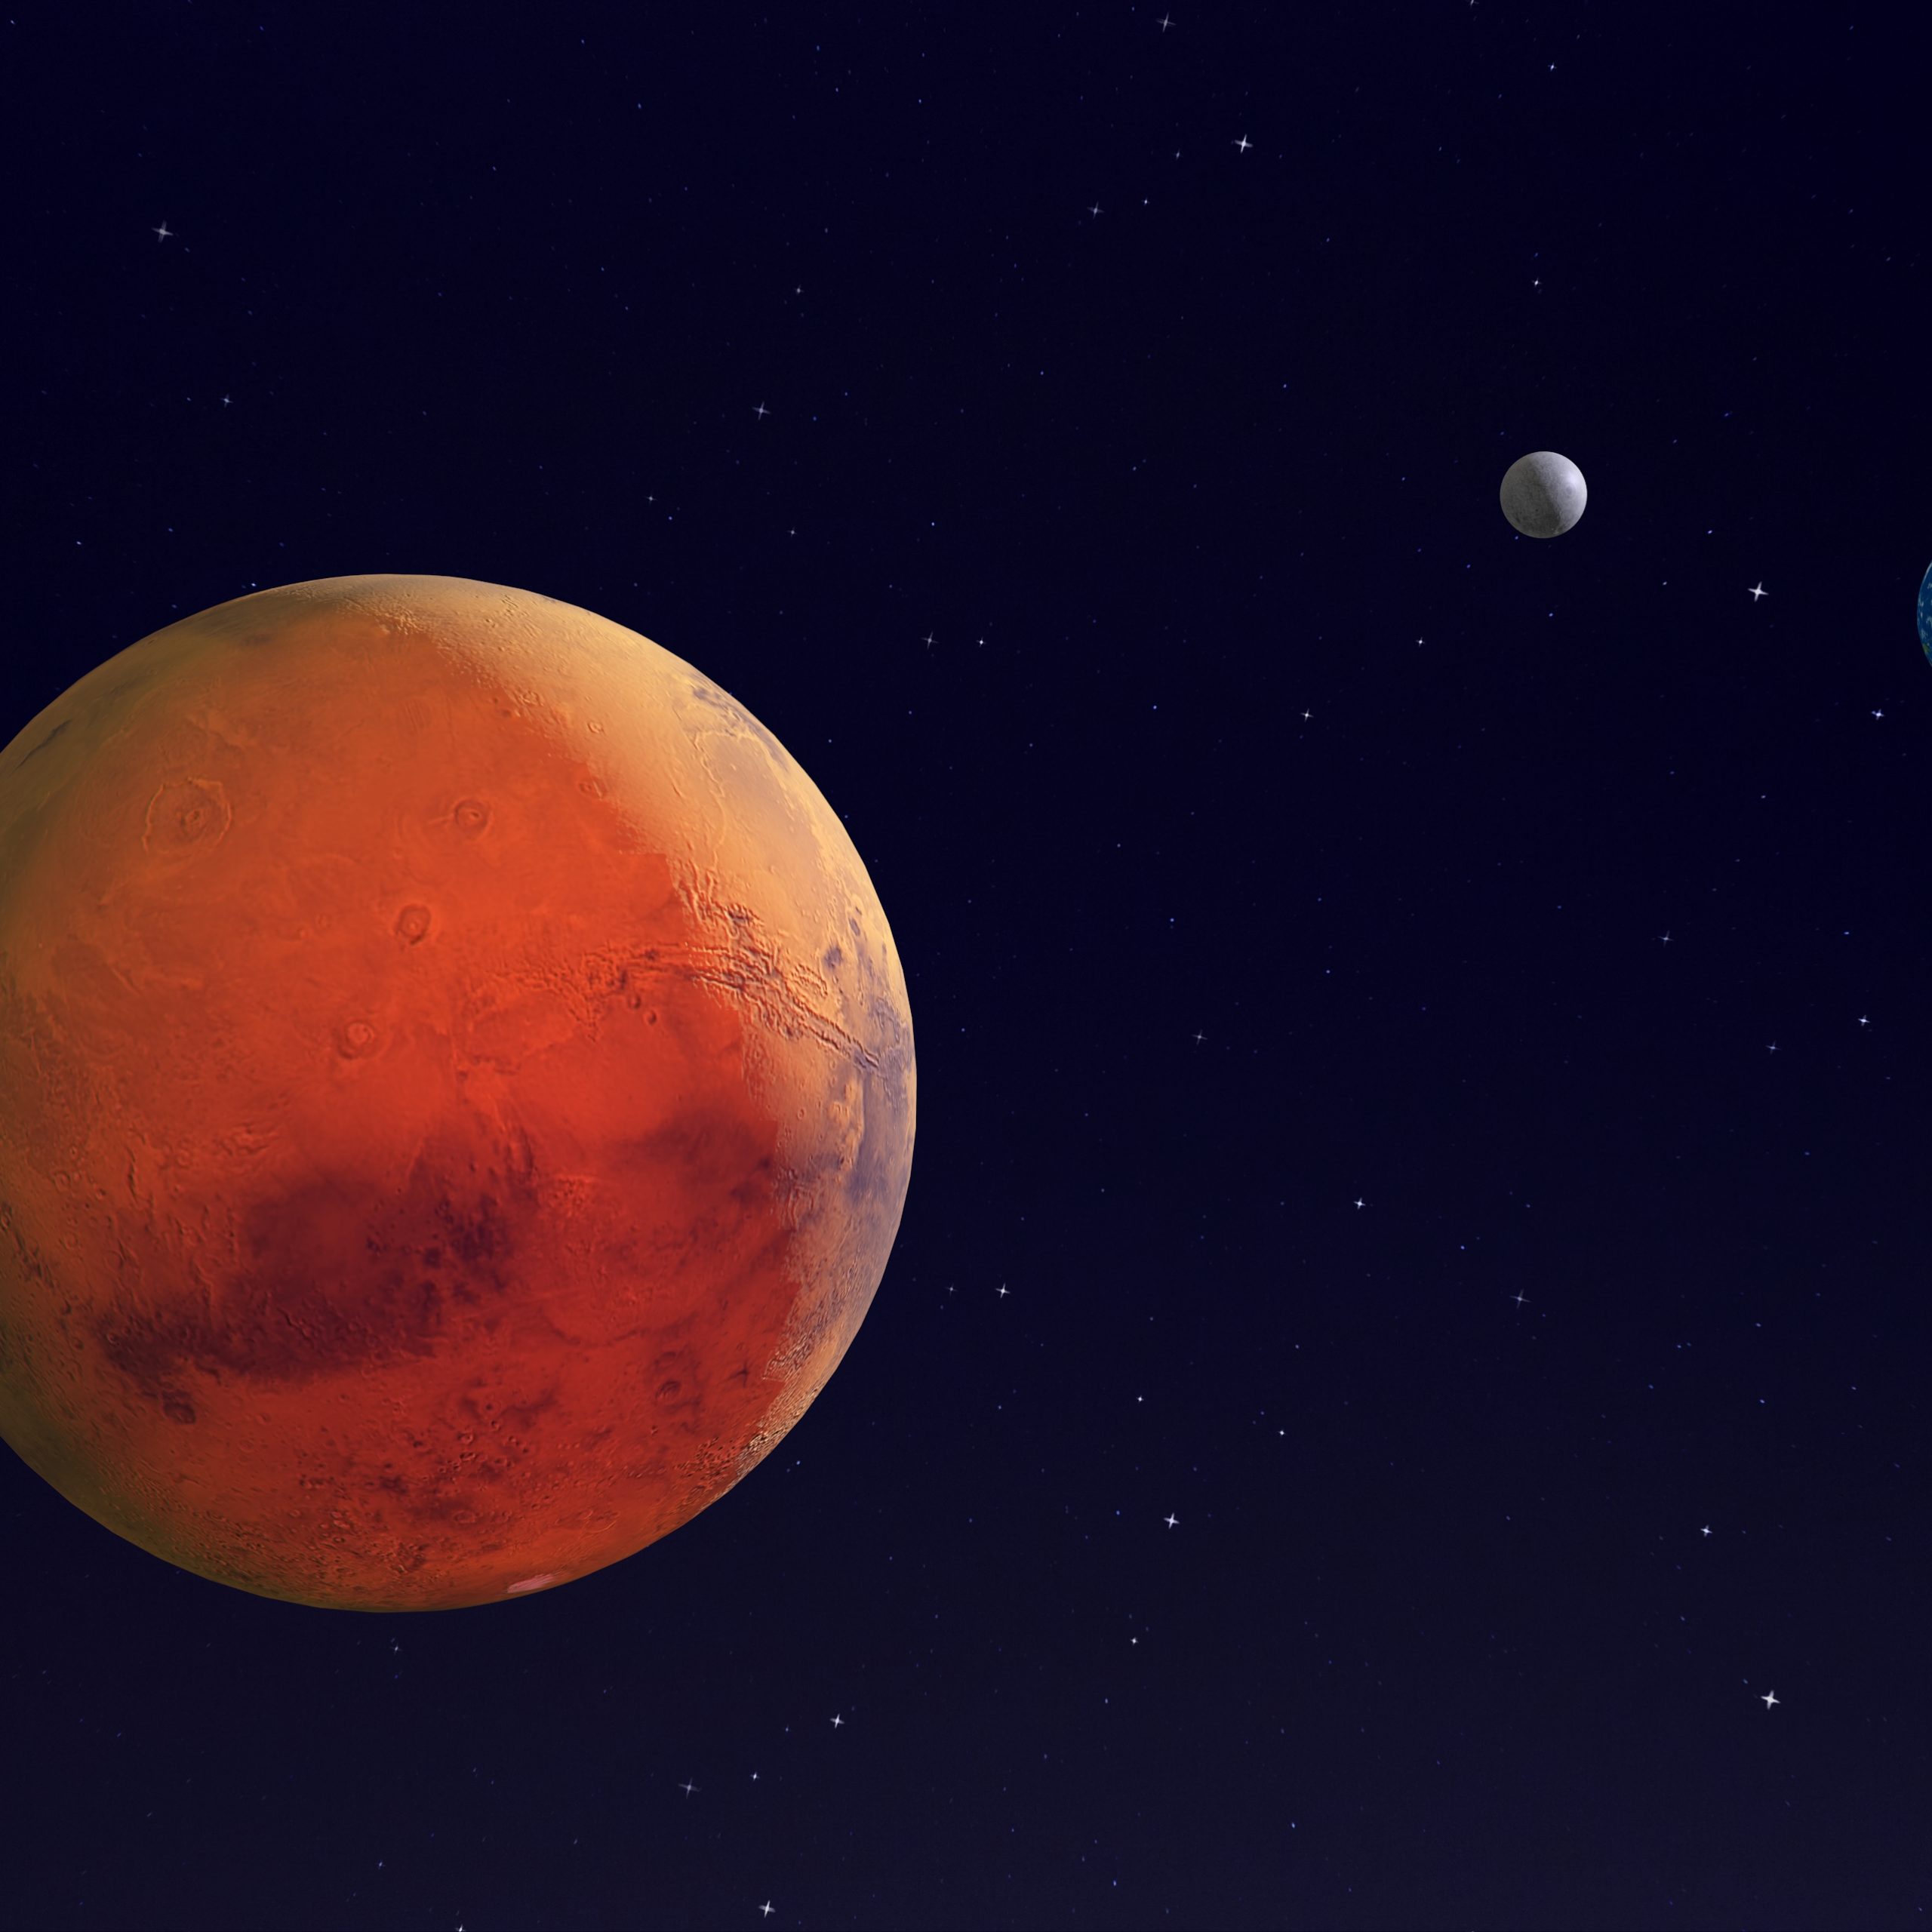 Mars, Earth and the Moon in space - 3d render - elements of this image furnished by NASA.